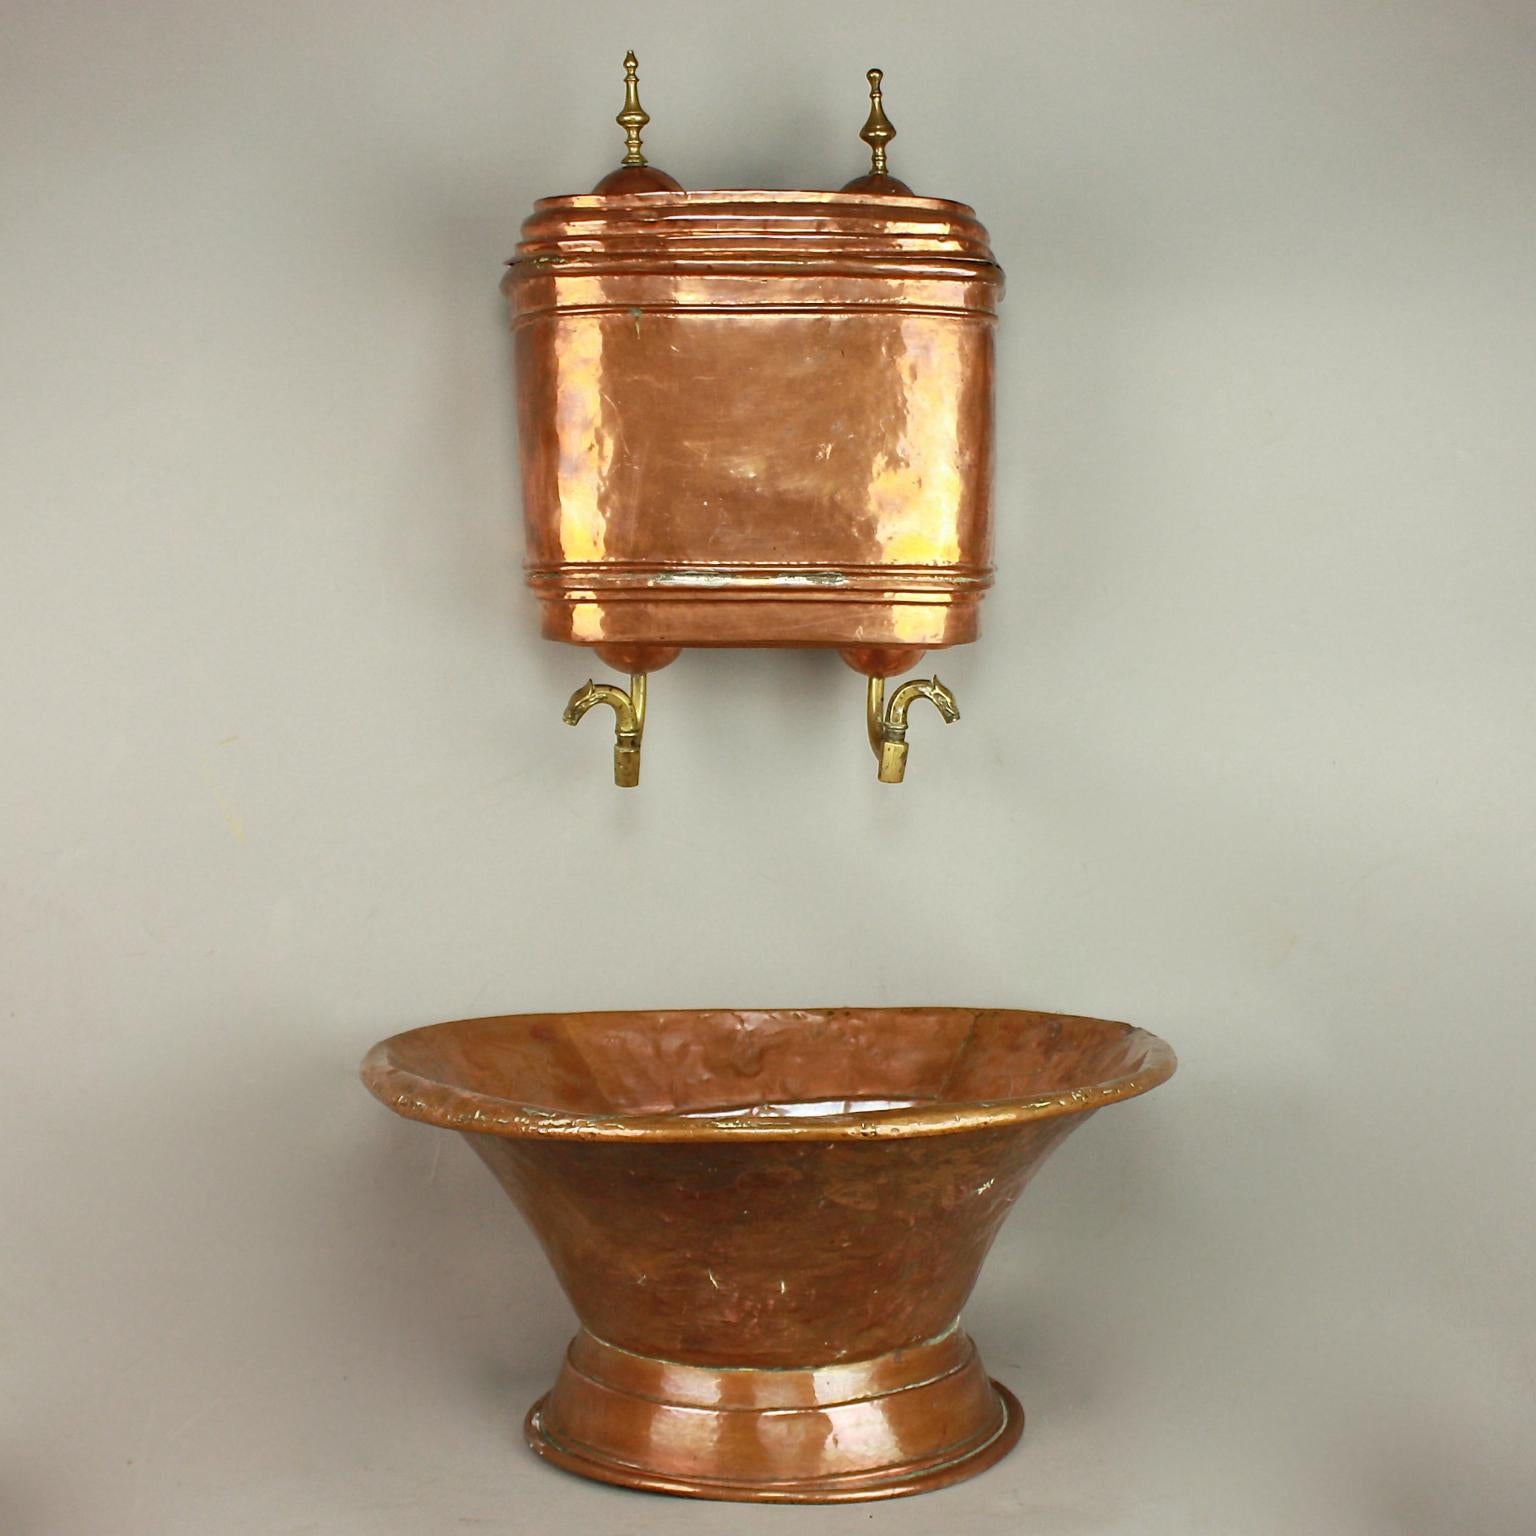 An 18th century copper repoussé fountain which was originally mounted on the wall inside the home. This Louis XVI period piece features a semicircular basin or lavabo and a fountain with lid and with its original bronze spigots and zoomorphic